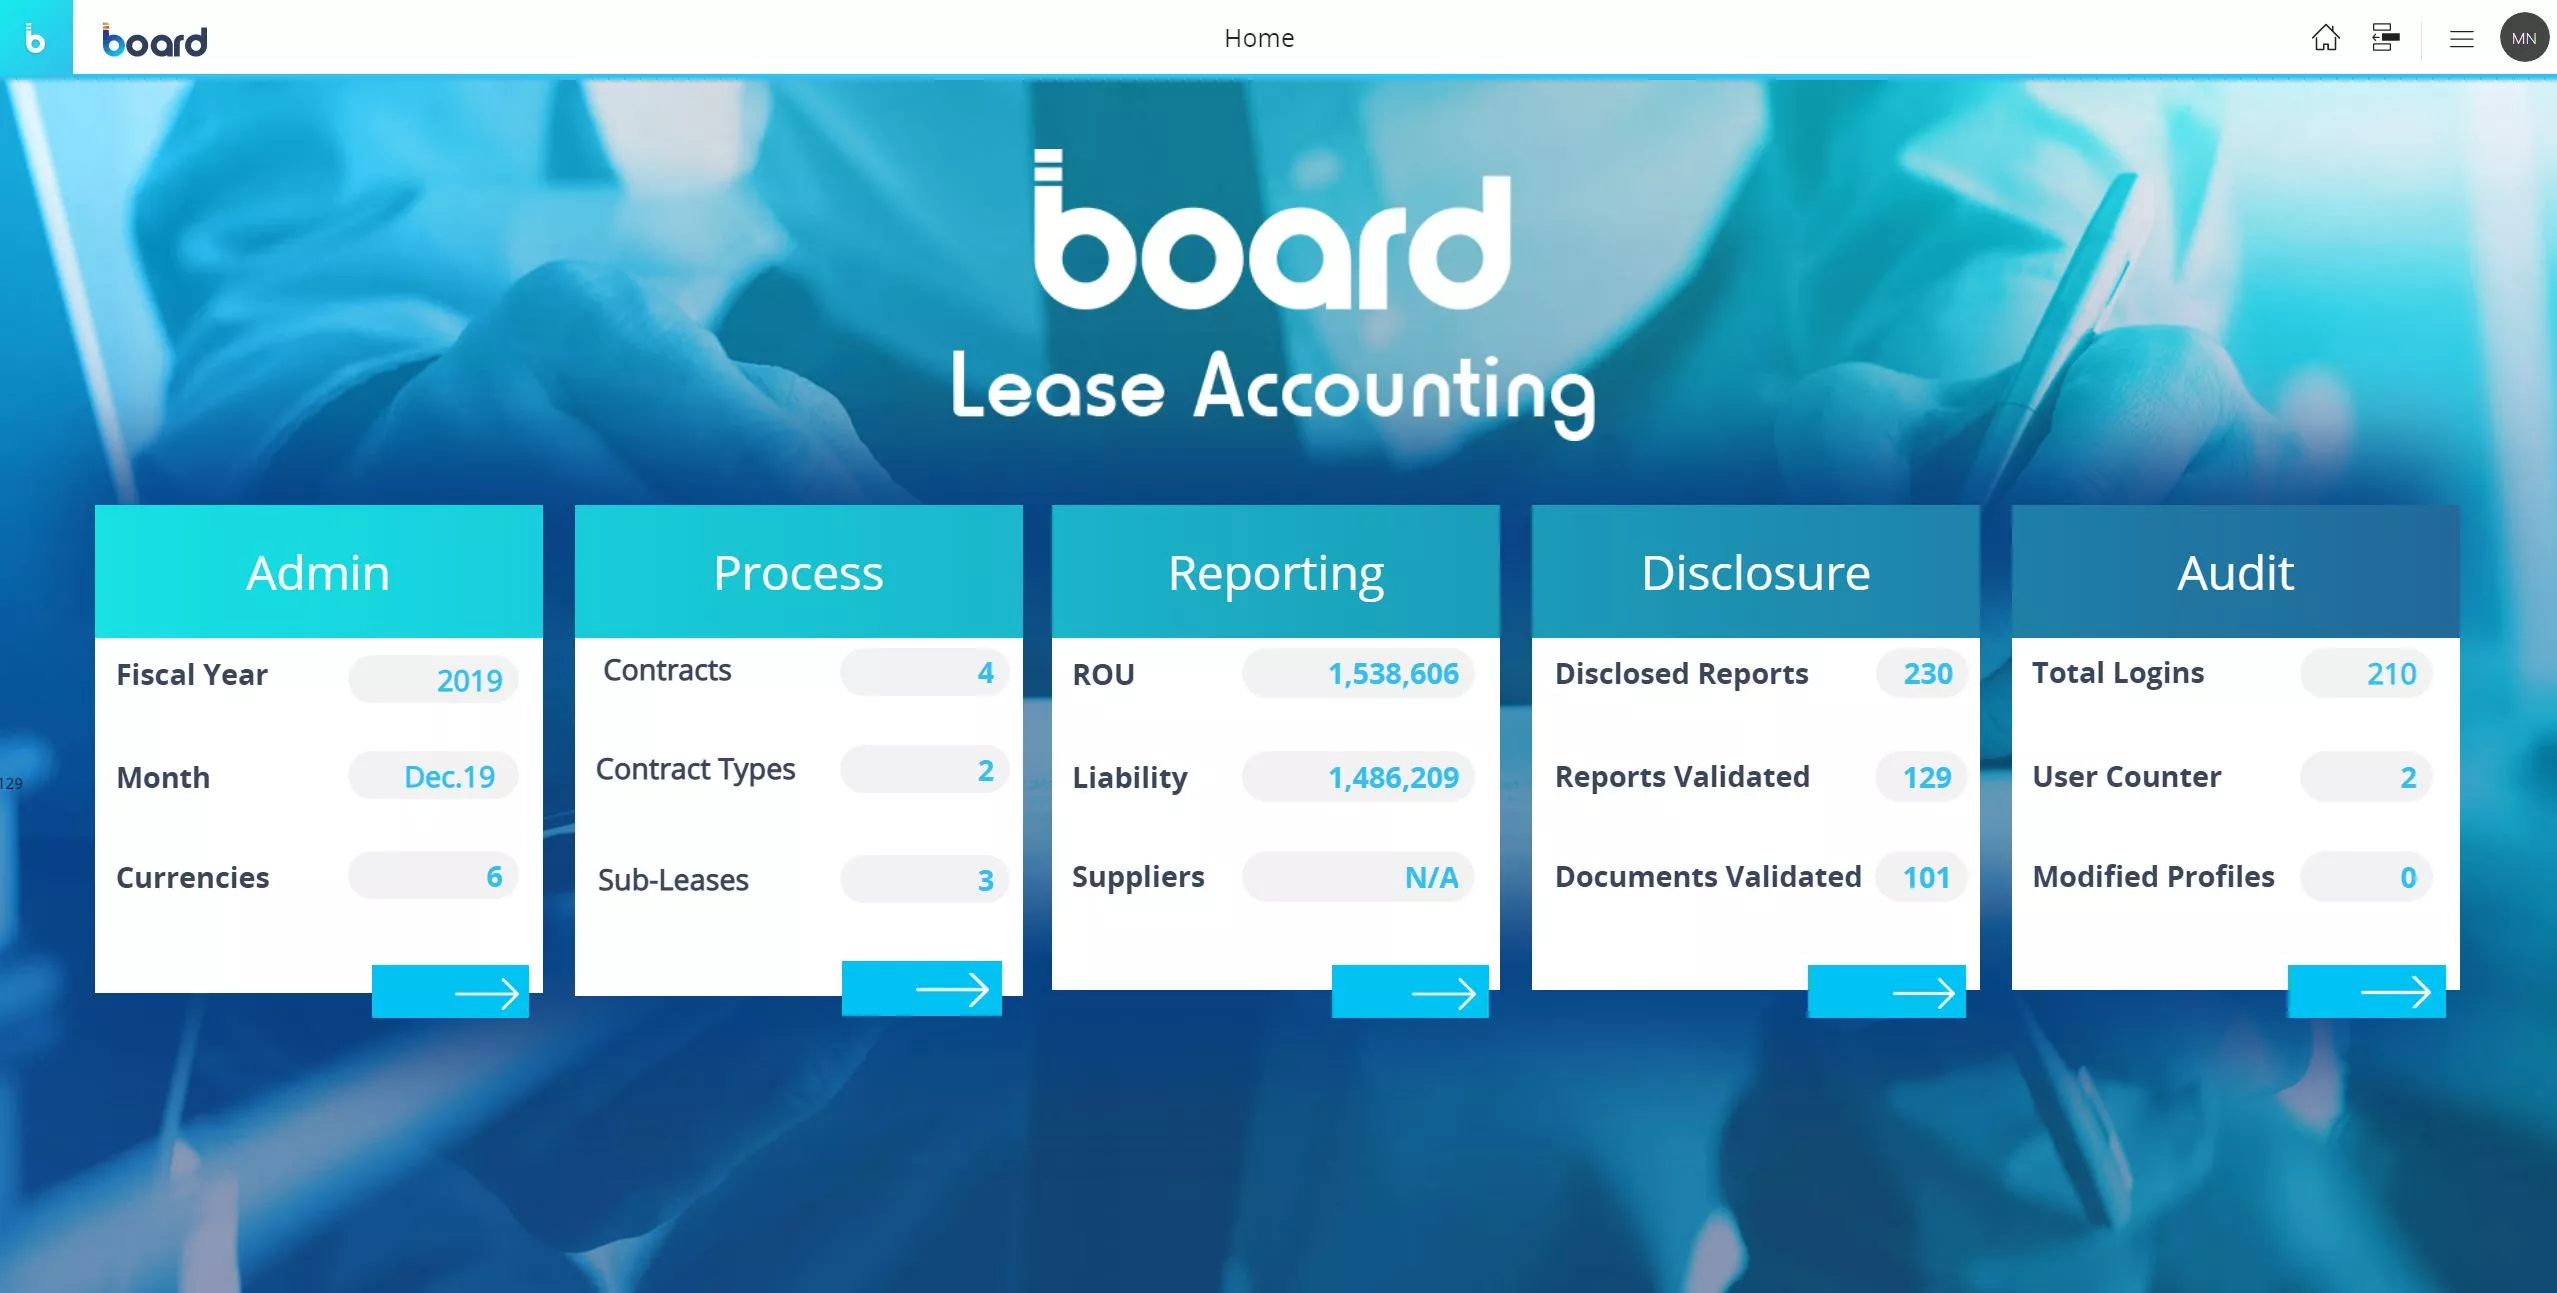 Board Lease Accounting Software Home Screen